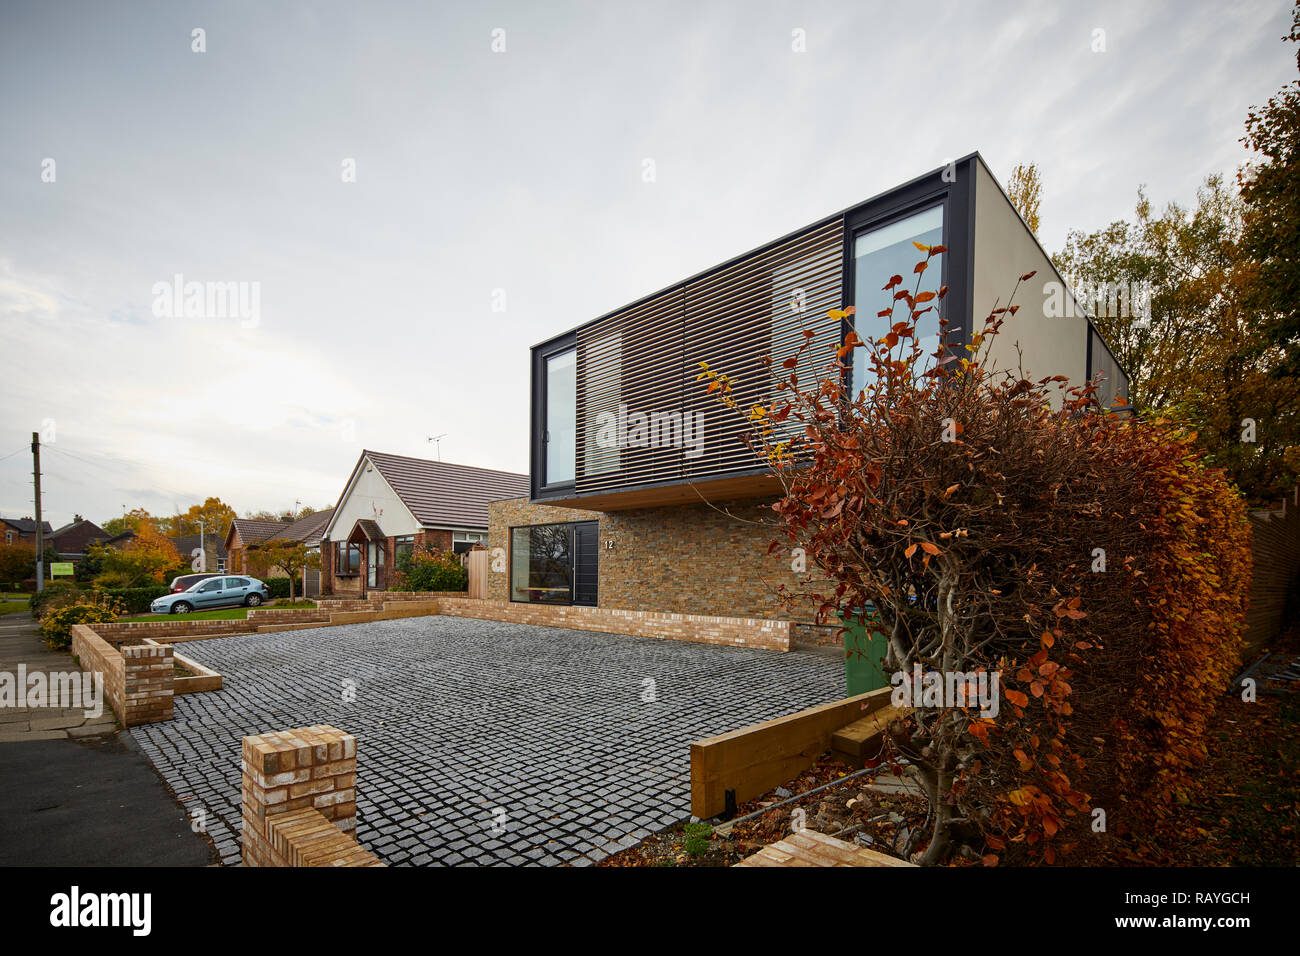 Marpel in Stockport, Cheshire  a modern bespoke detached house in the village Stock Photo